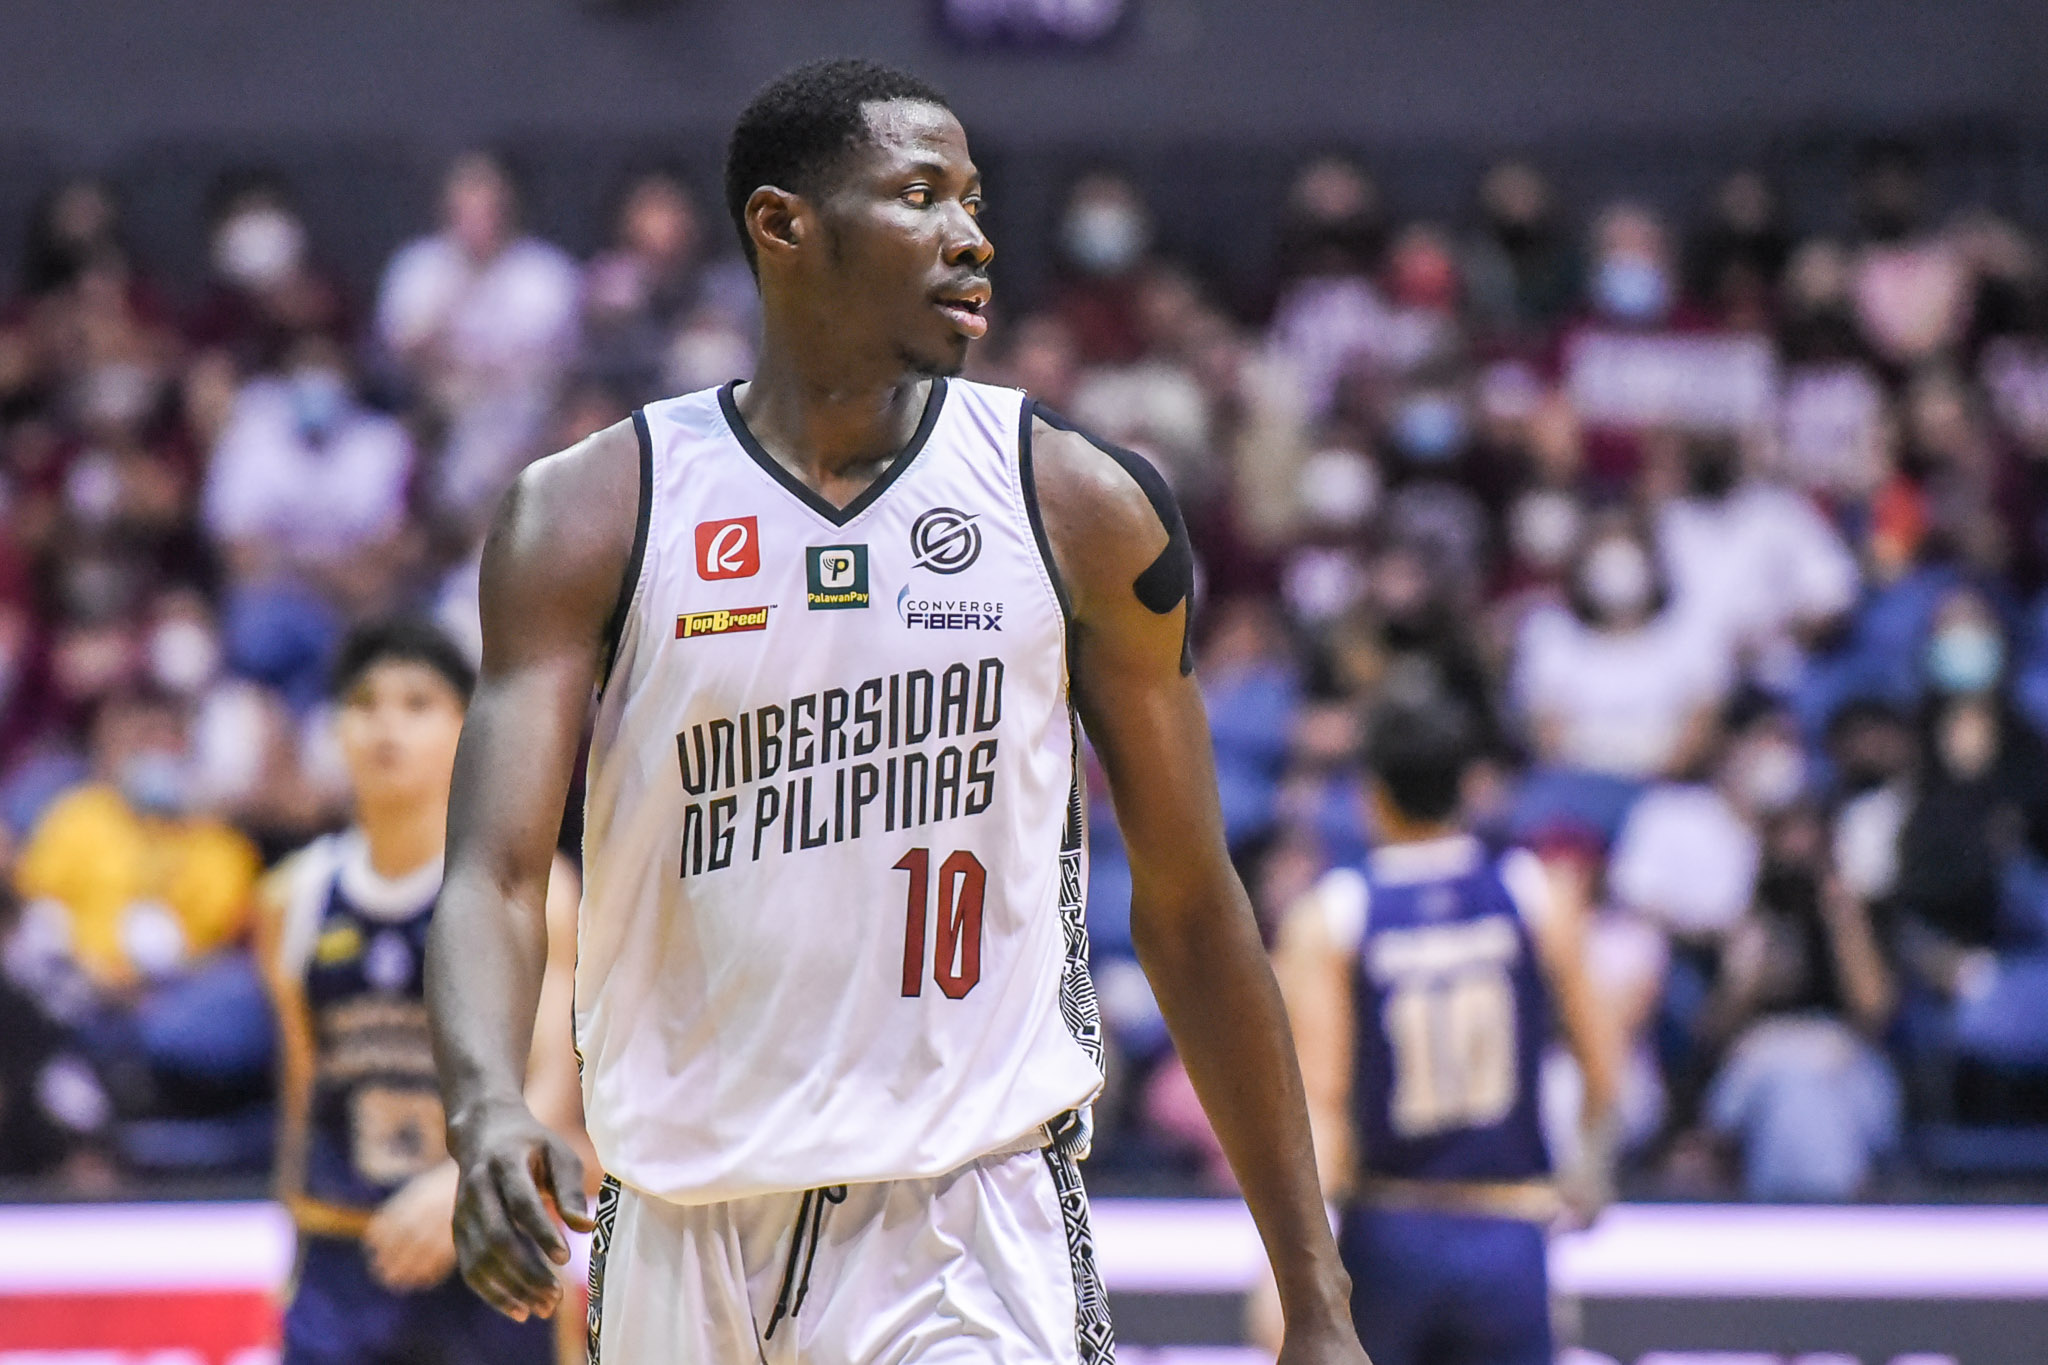 UP Fighting Maroons' Malick Diouf. –UAAP PHOTO